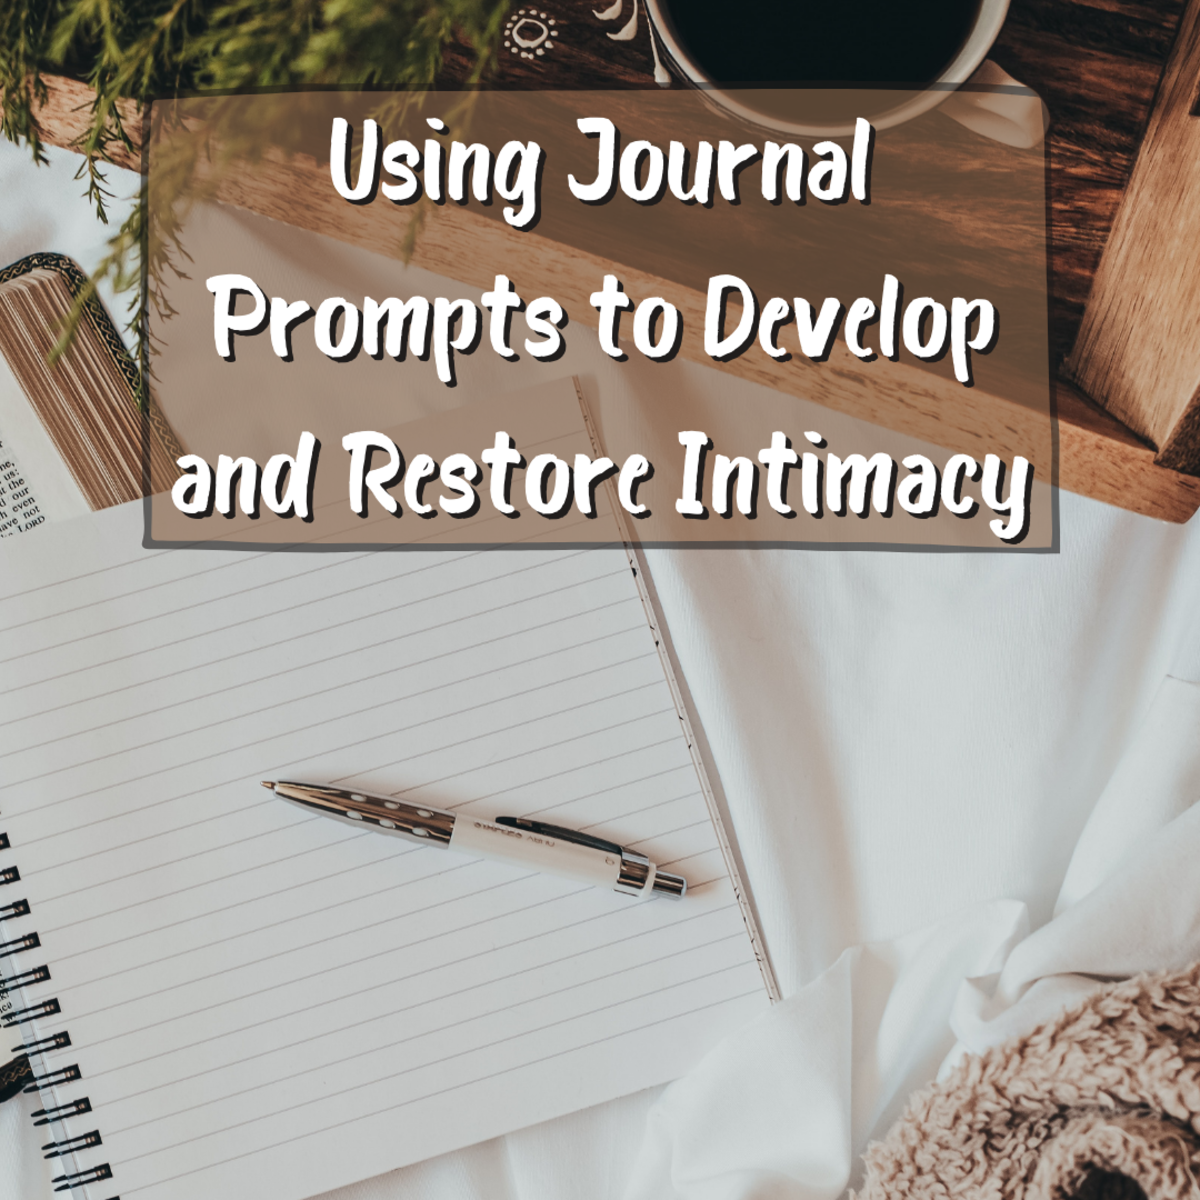 Using Diaries to Restore Intimacy to Your Relationship